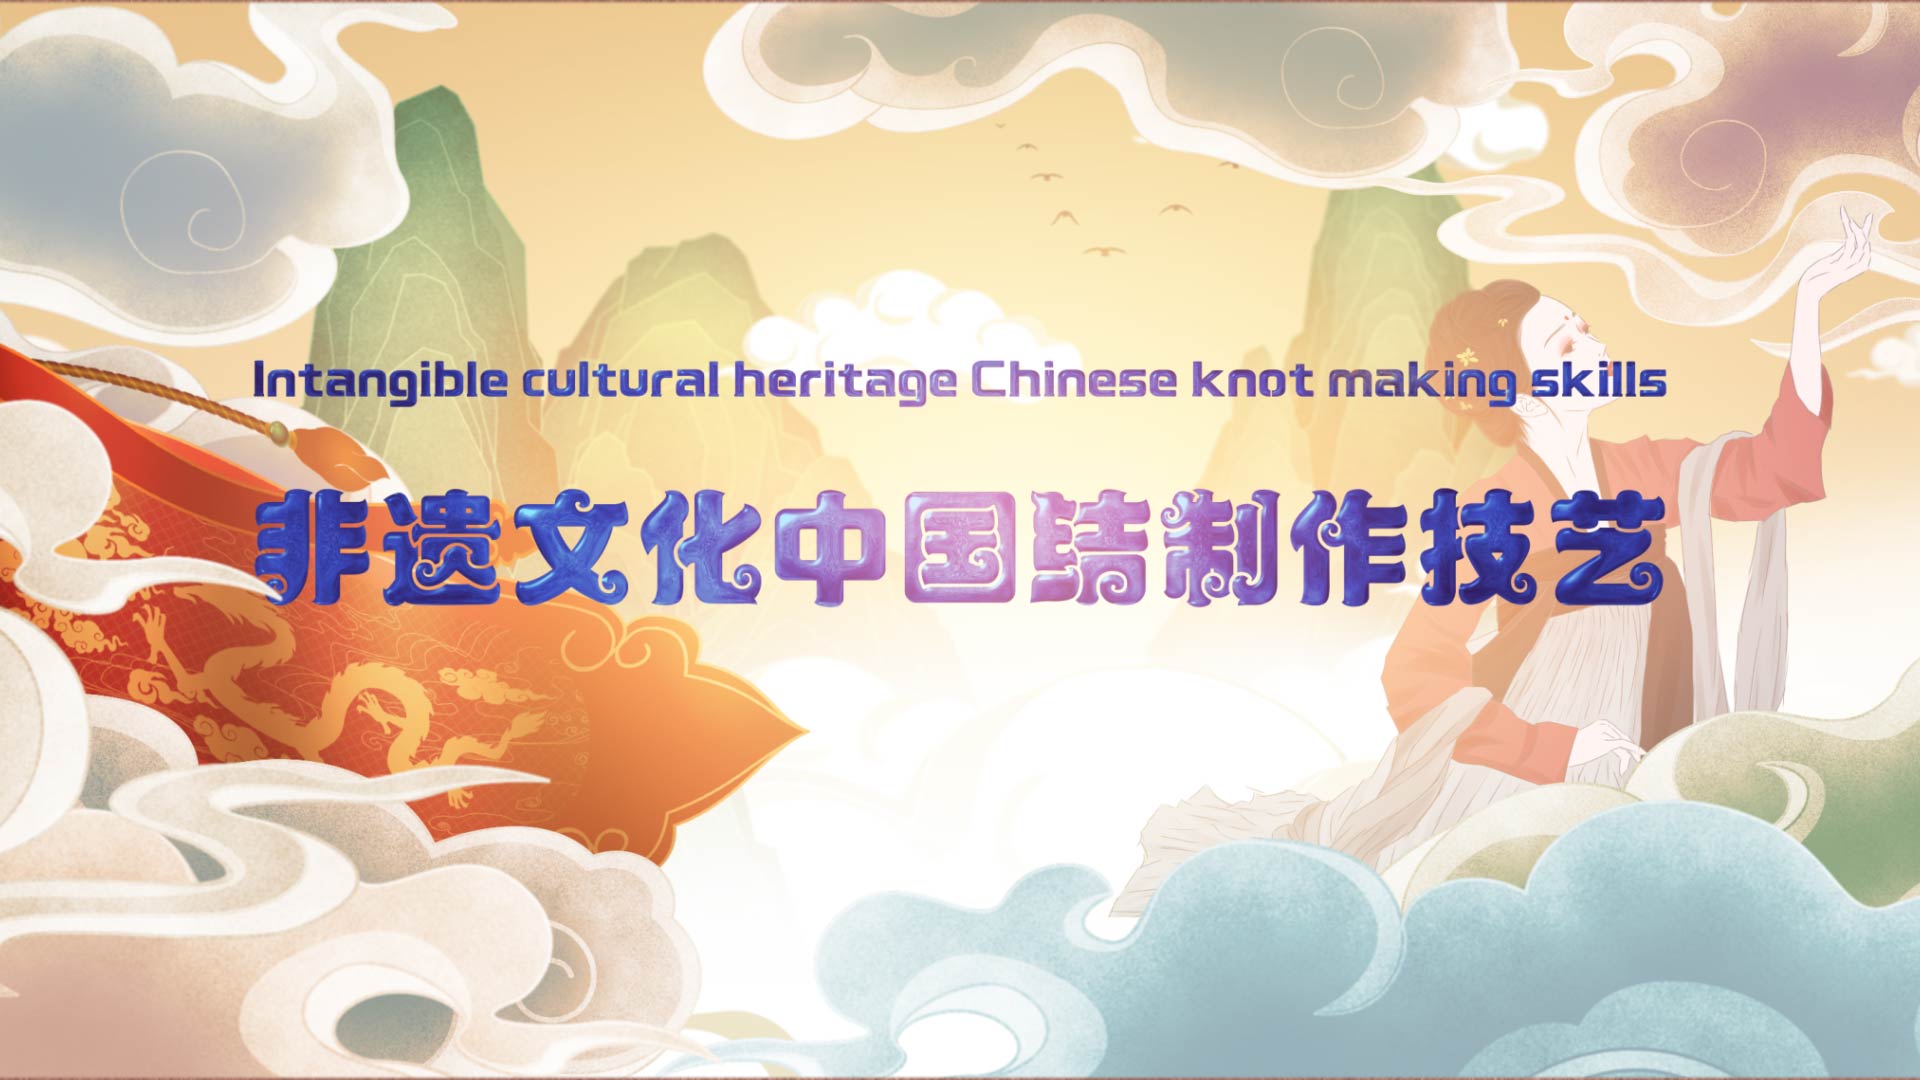 Intangible cultural heritage Chinese knot making skills